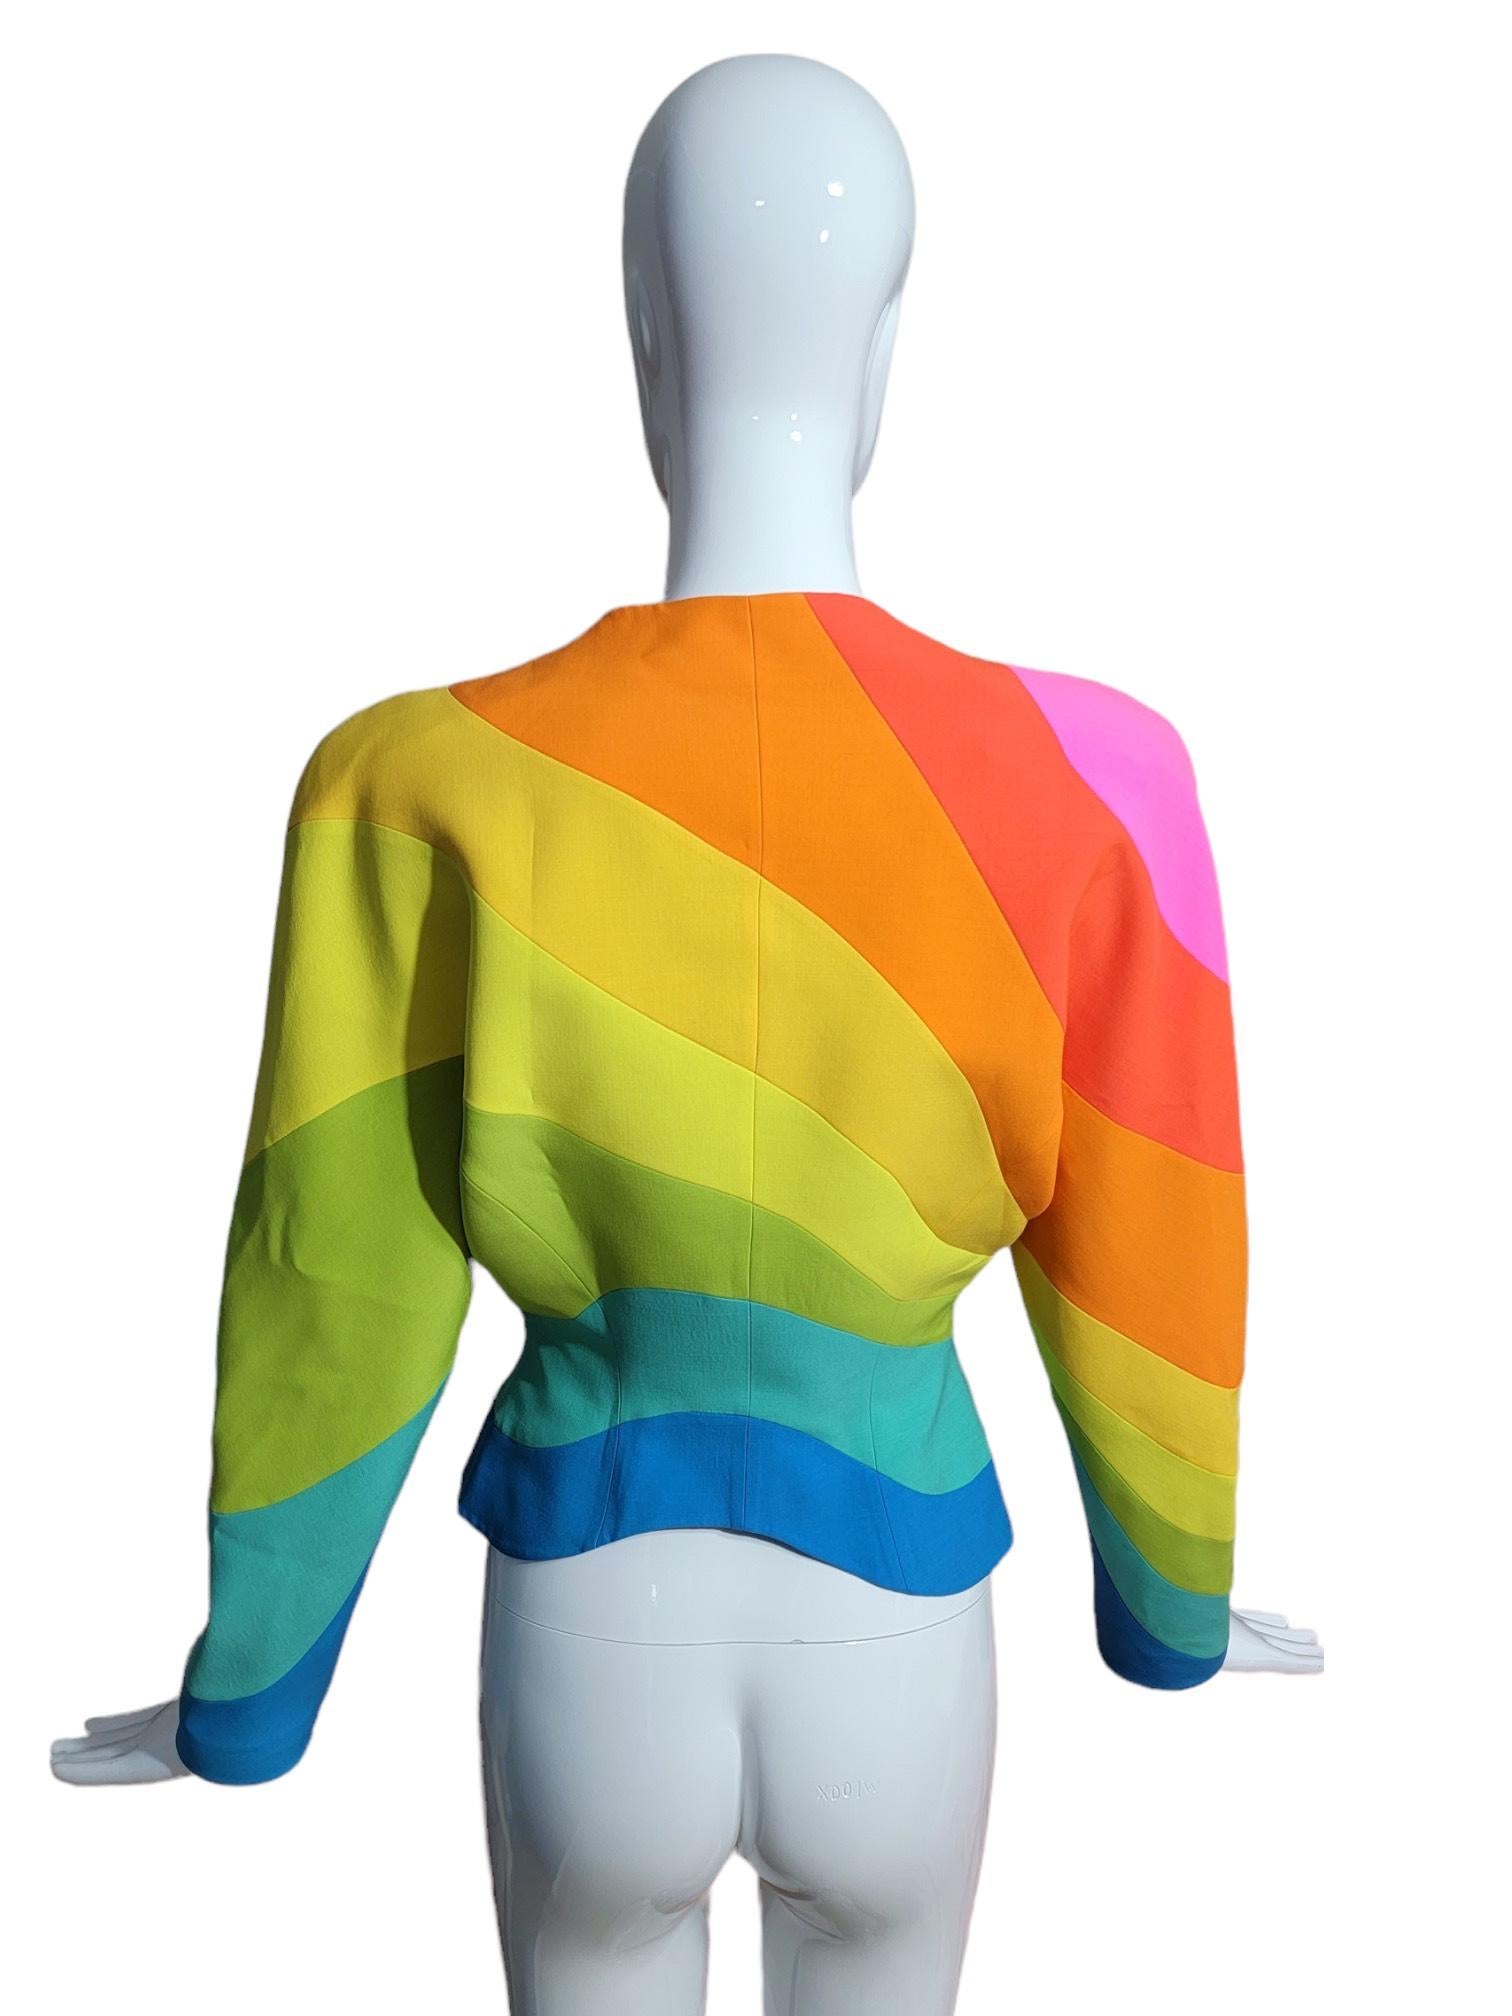 S/S 1990 Thierry Mugler Iconic Rainbow Structured Runway Jacket  For Sale 2